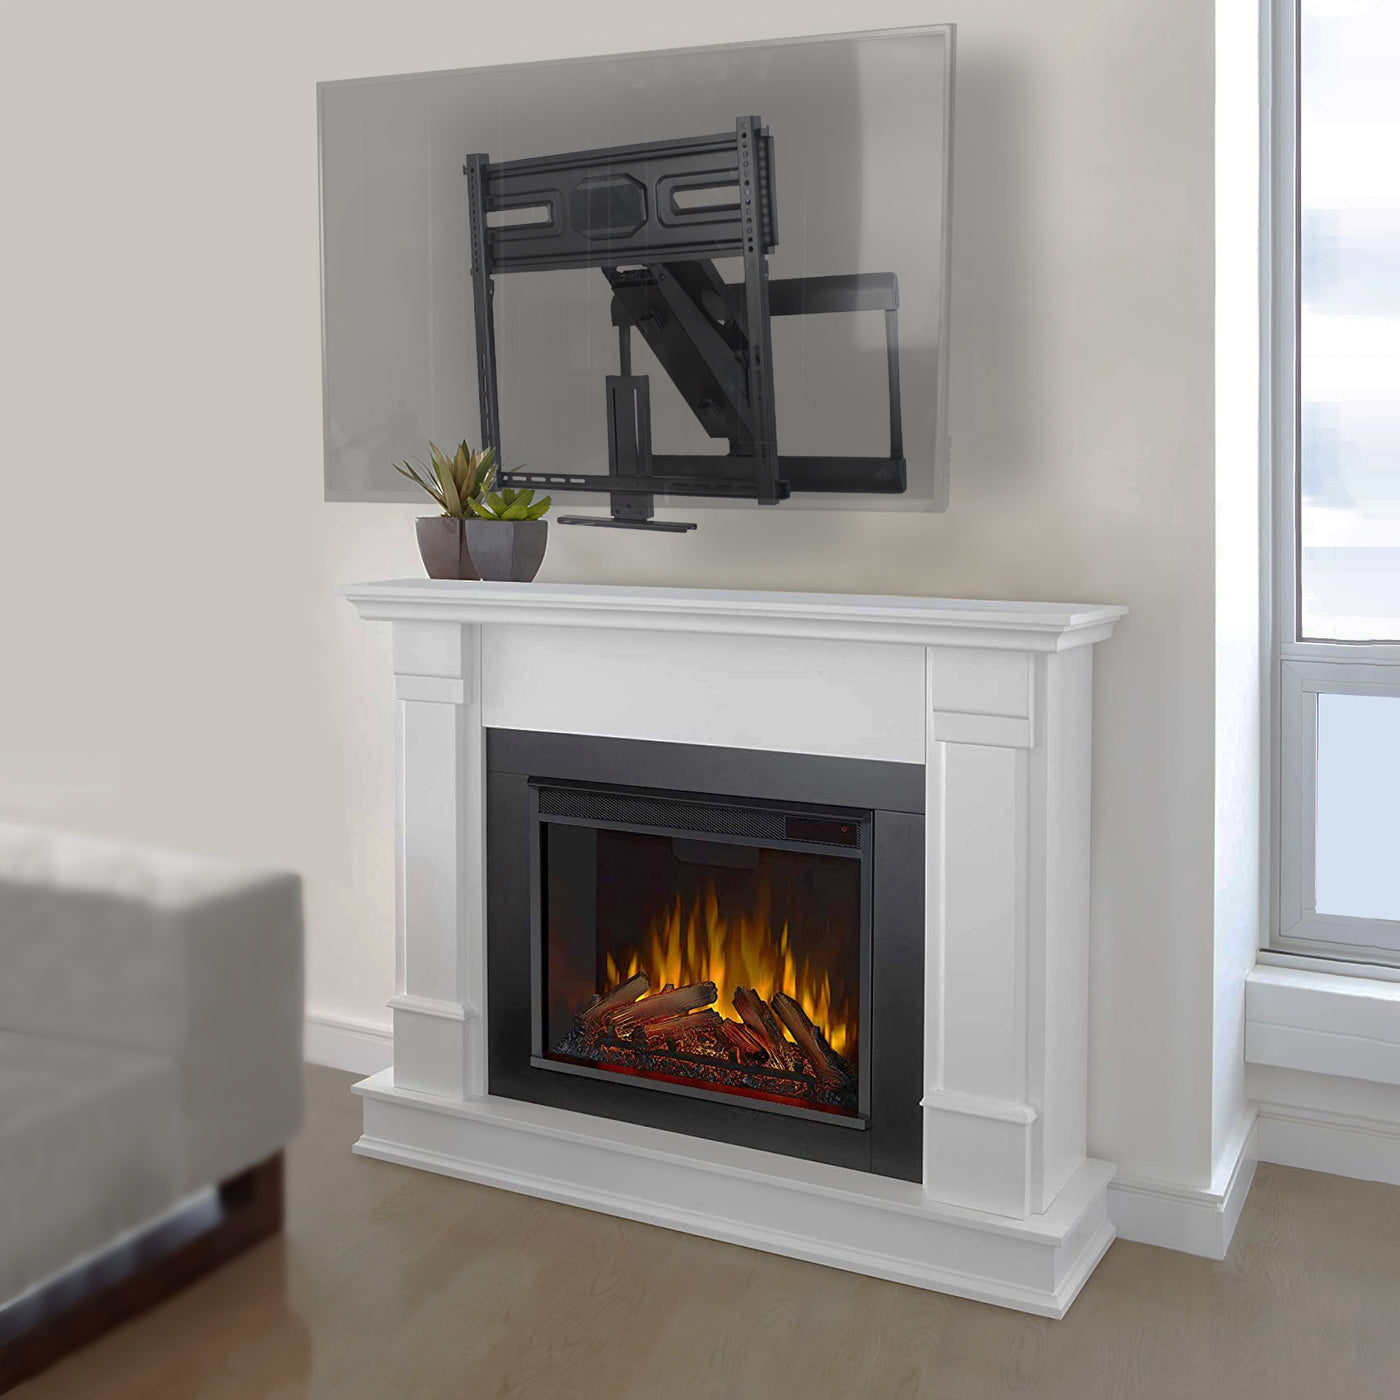 Heavy duty Mechanical Spring TV mount with a large TV screen displayed above a fireplace.